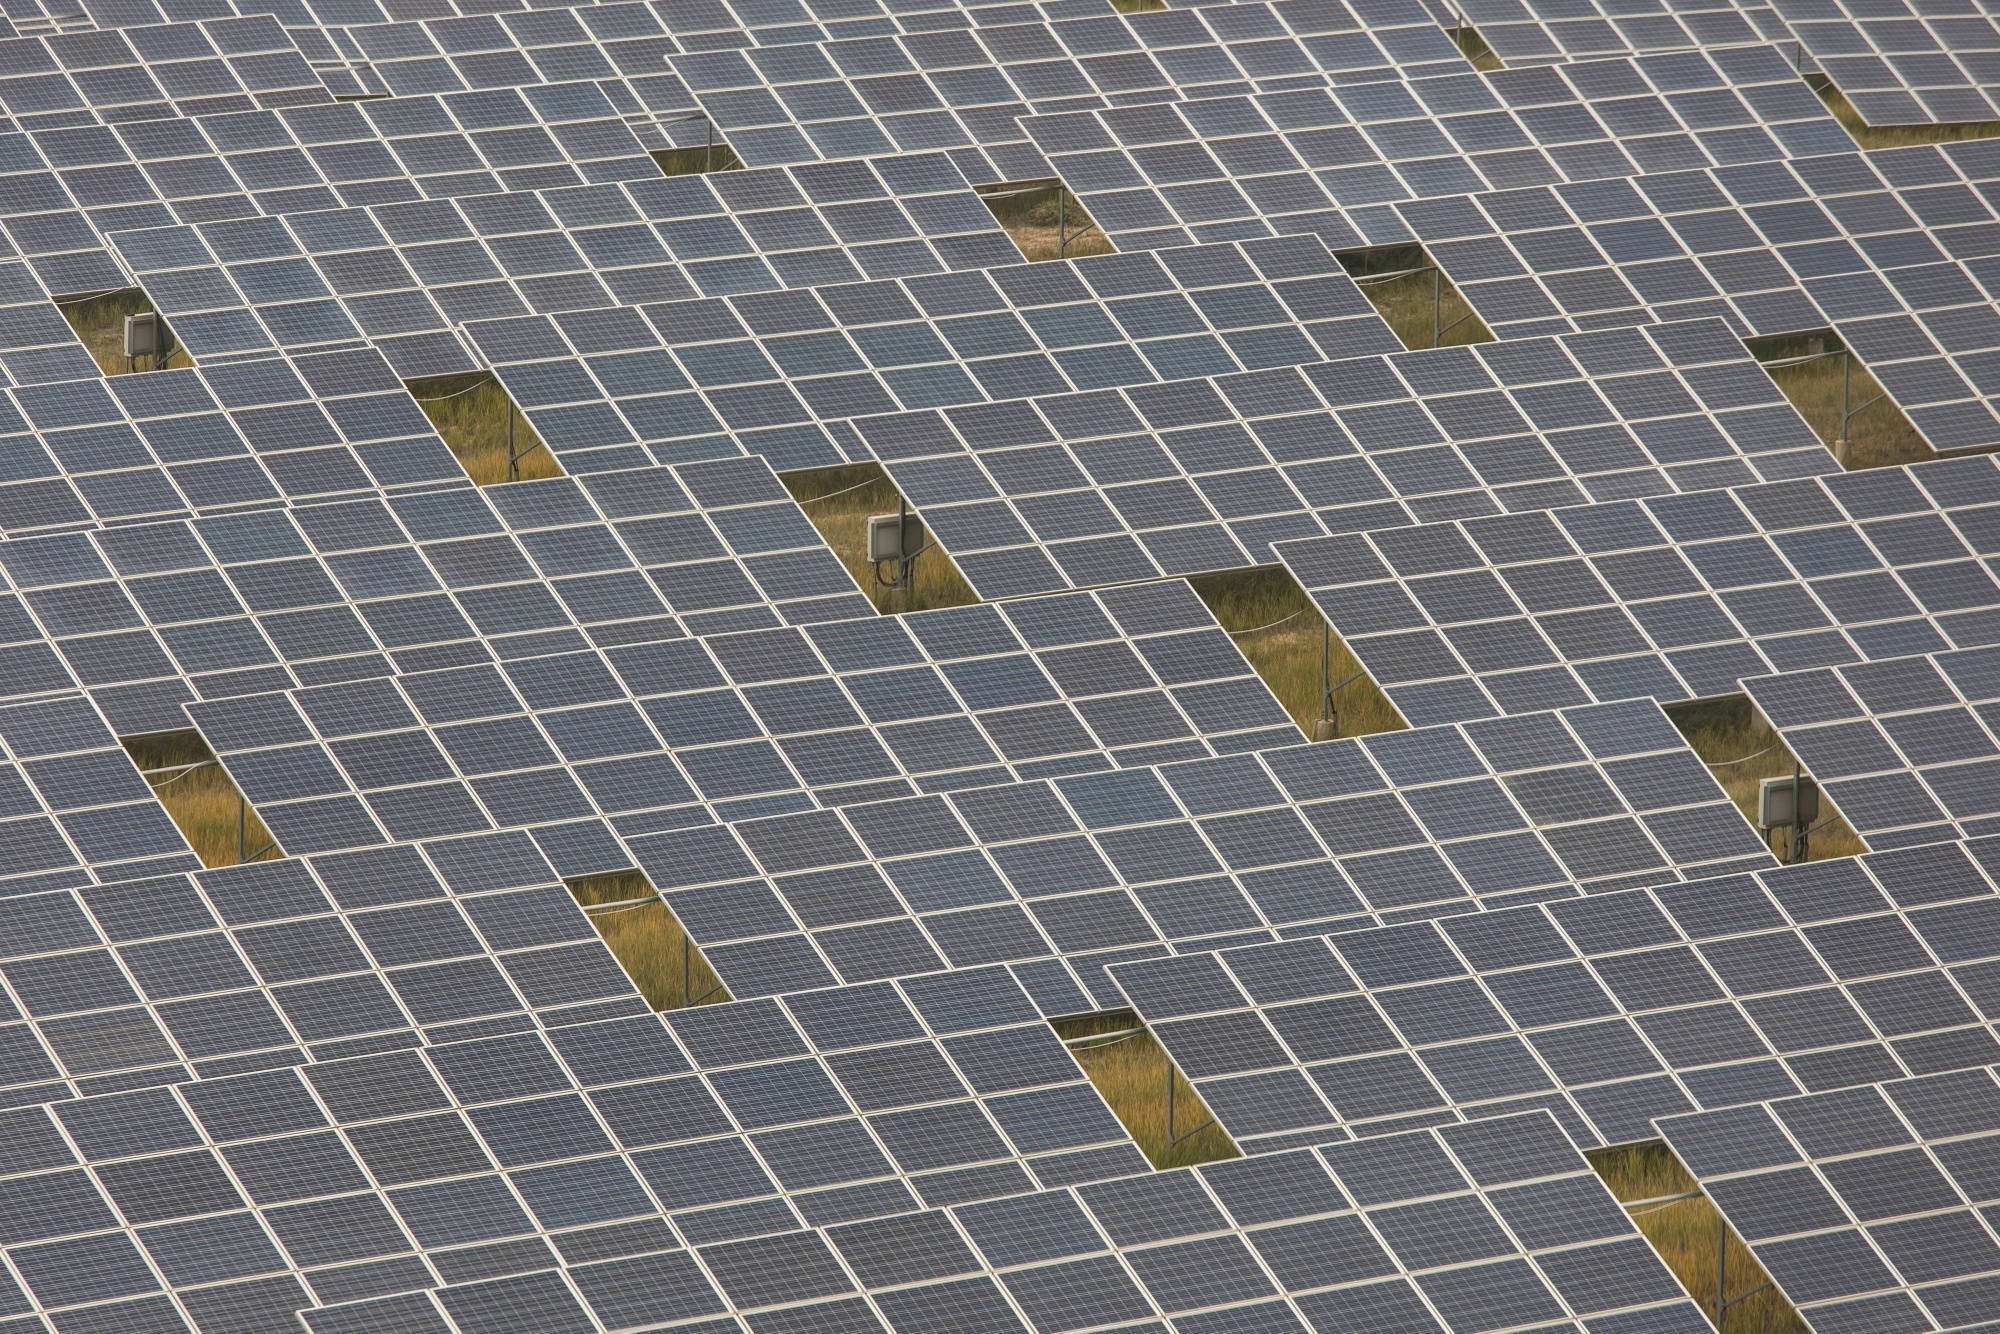 Photovoltaic panels at a solar farm in Qinghai province, China.